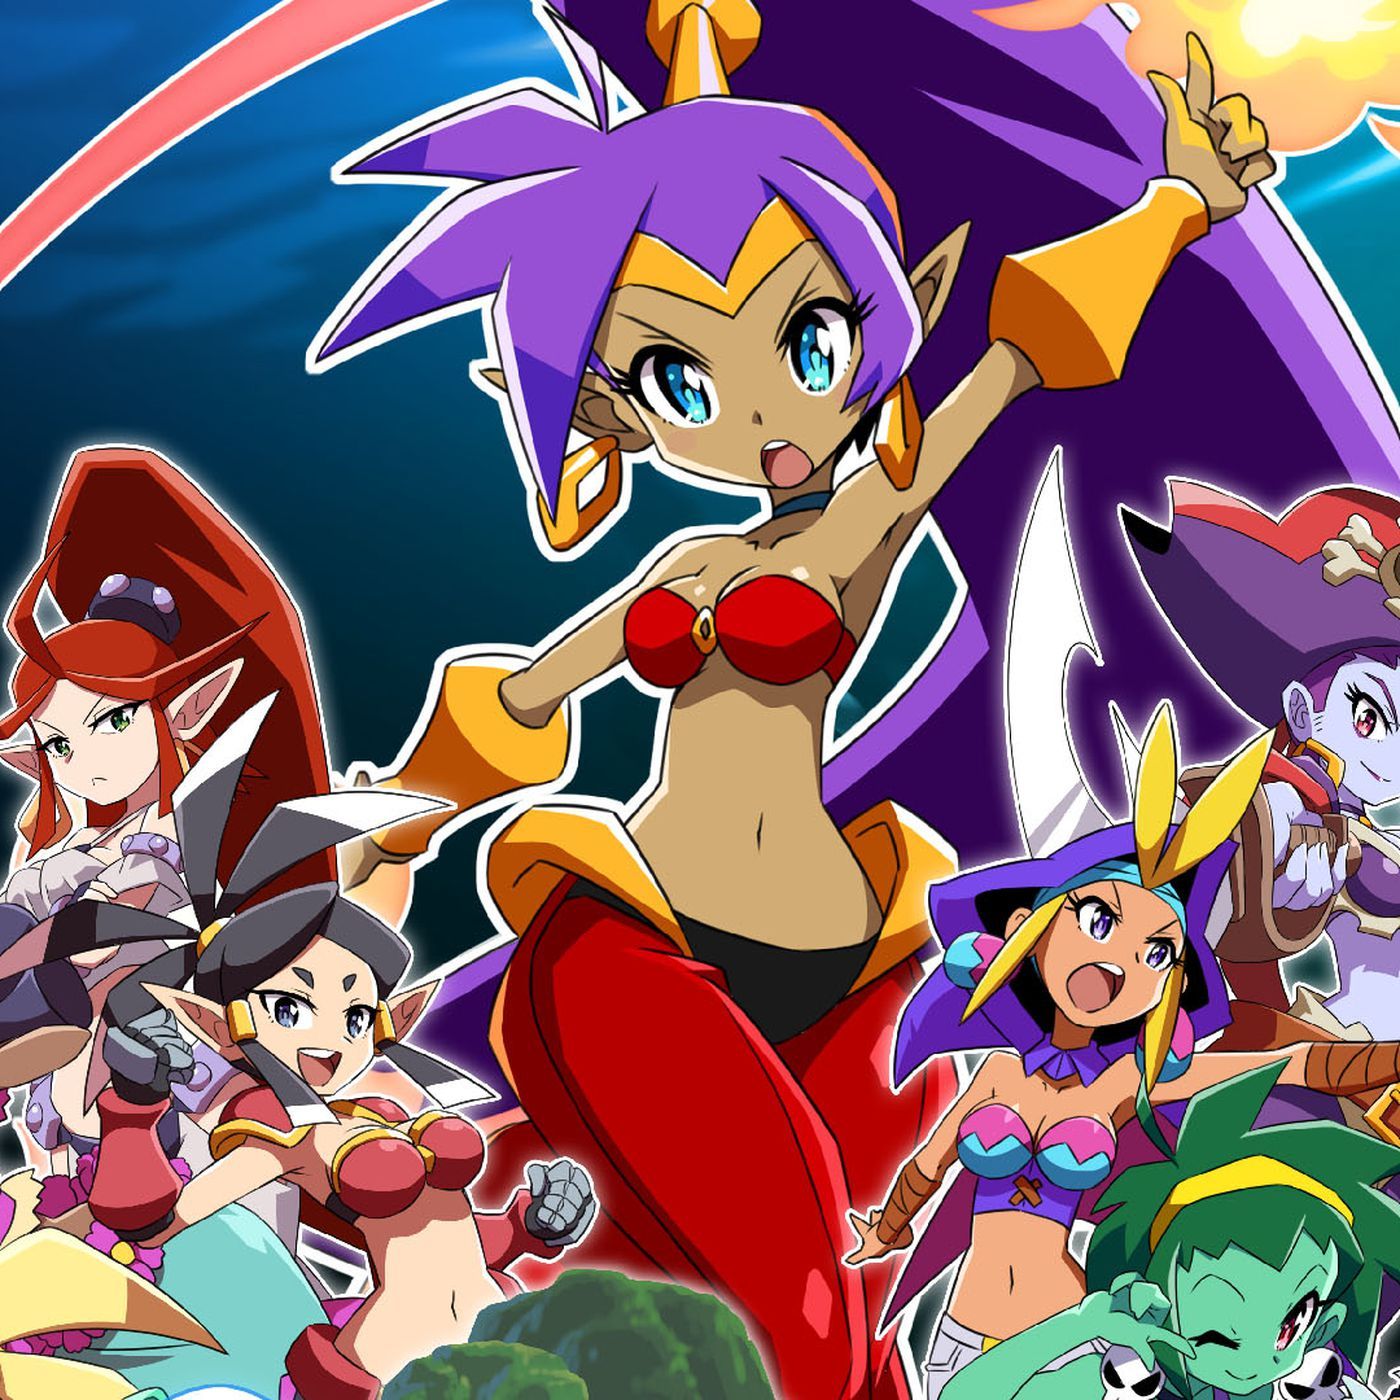 Shantae and the Seven Sirens isn't a 'mobile game,' yet here...